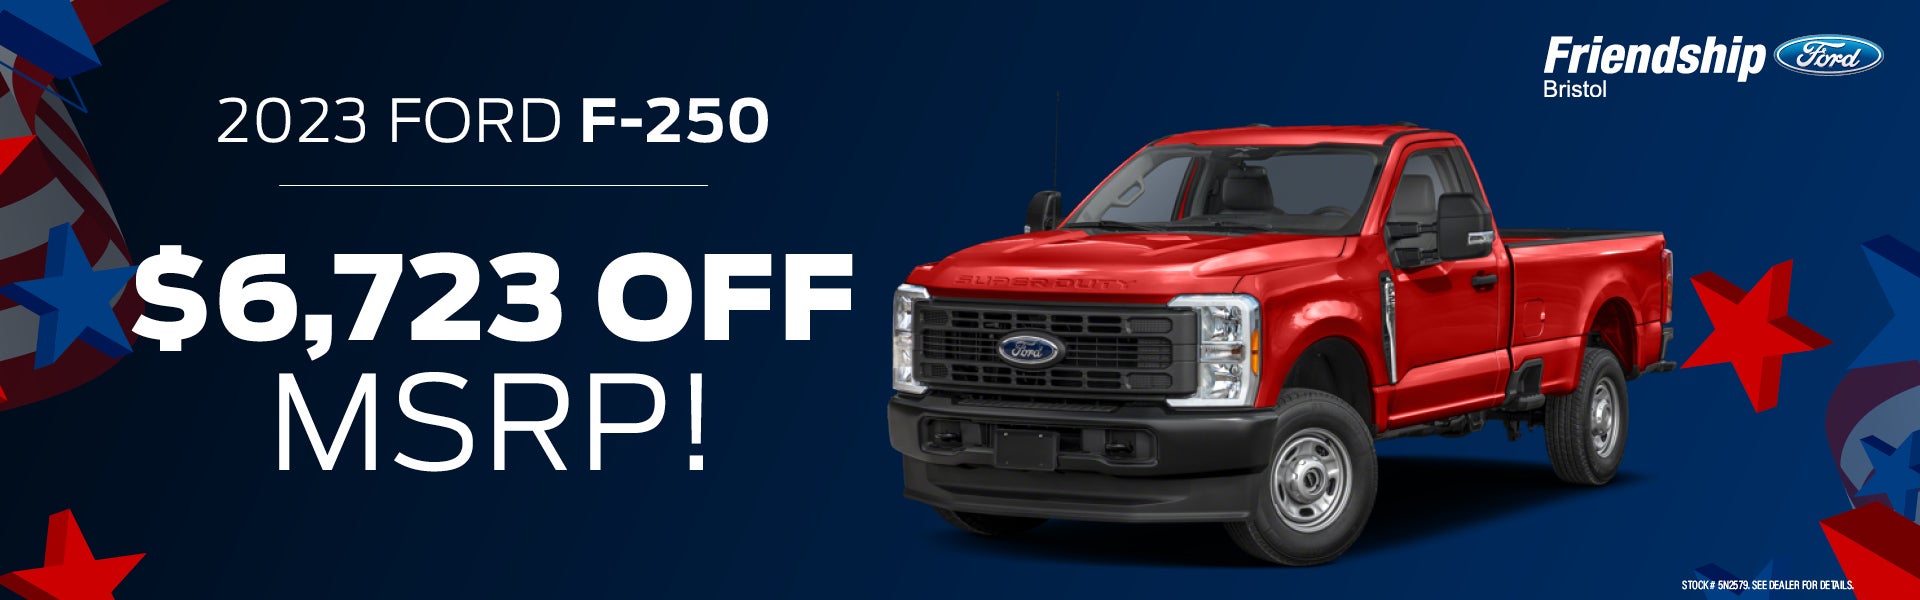 SHOP 2023 FORD F-250s!